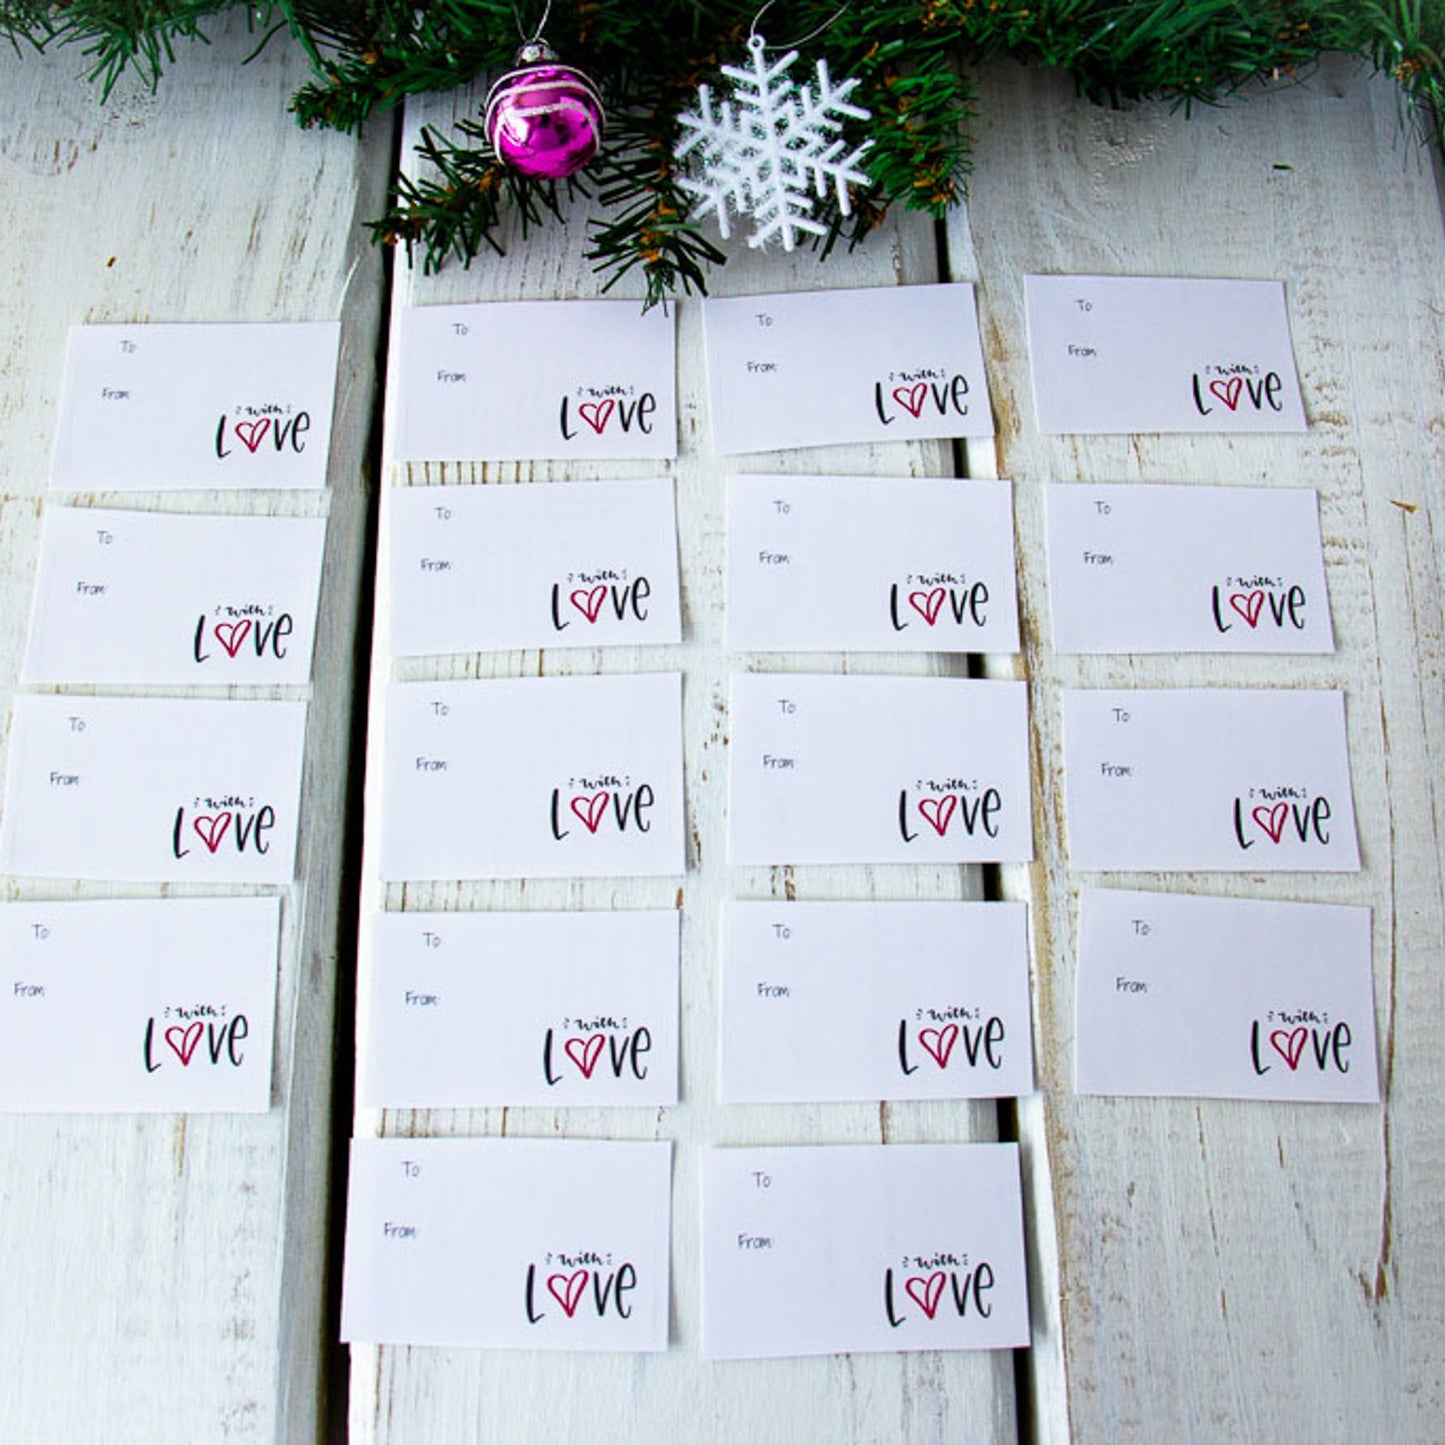 With Love - Adhesive Gift Tags